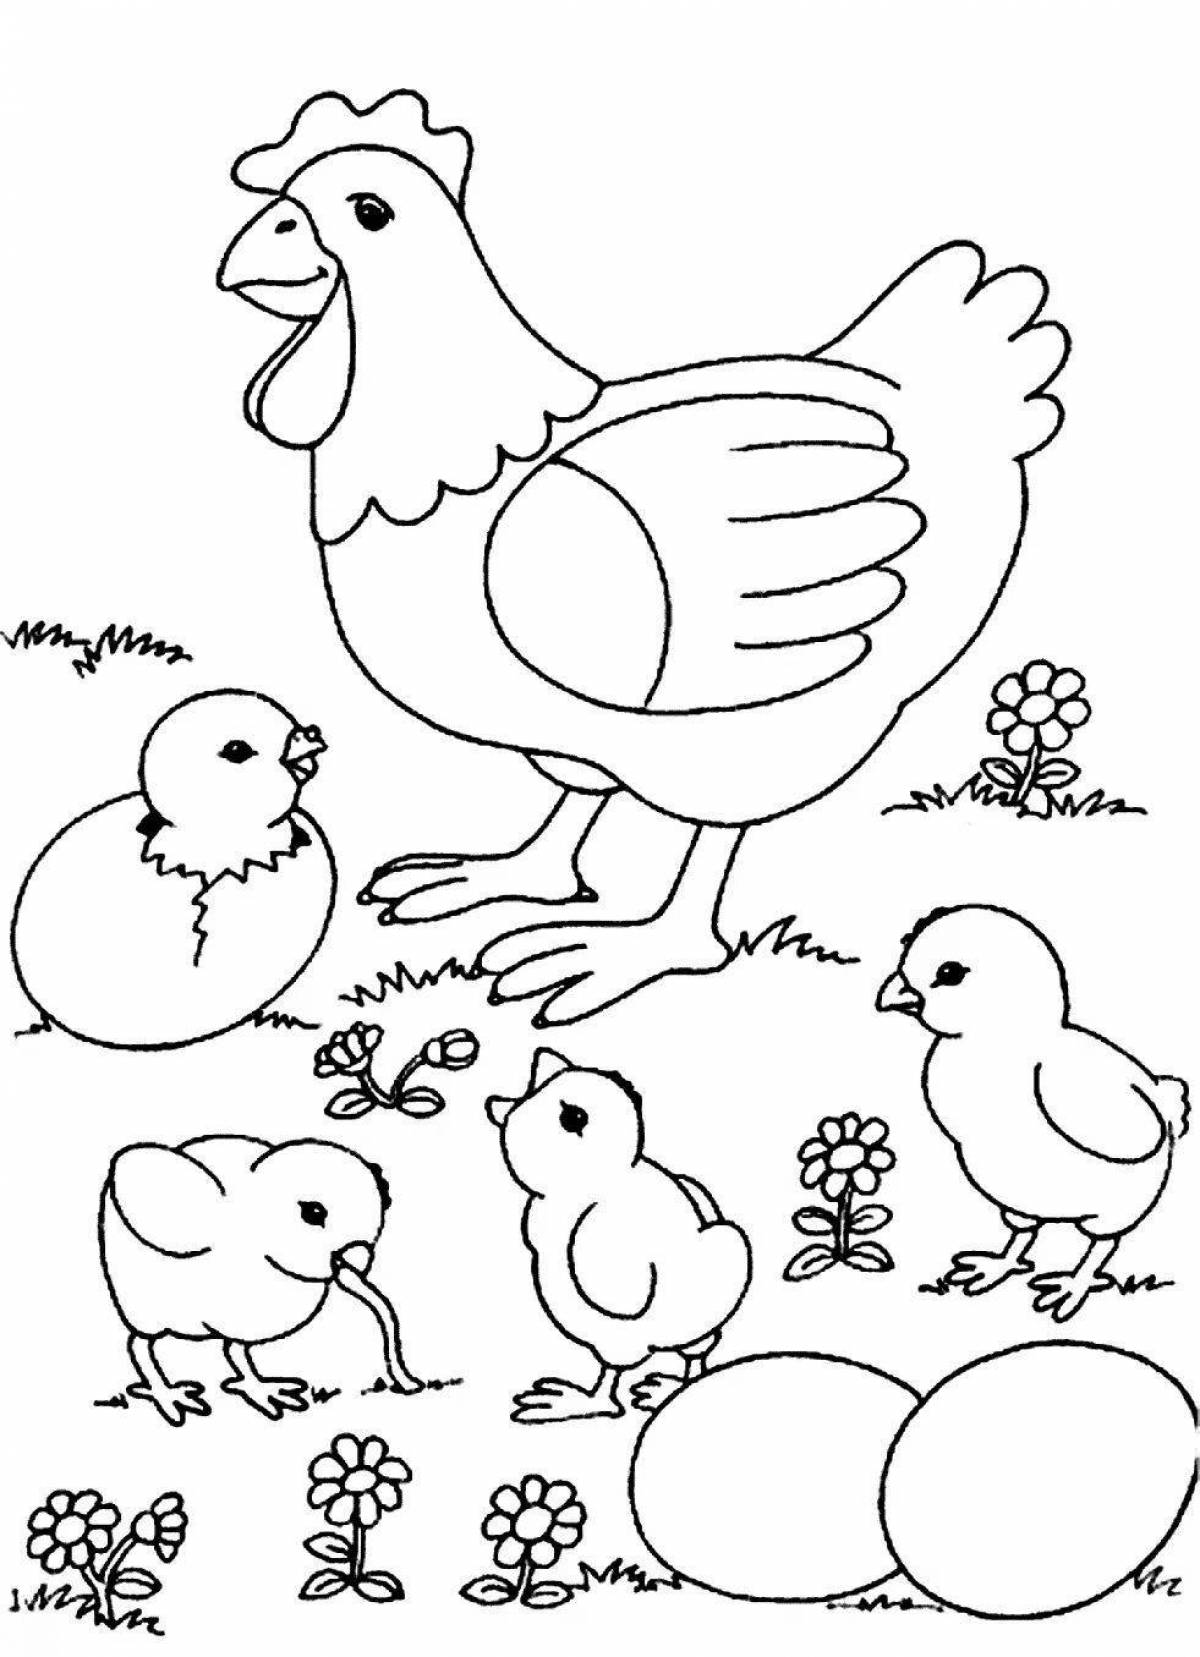 Child coloring pages for kids